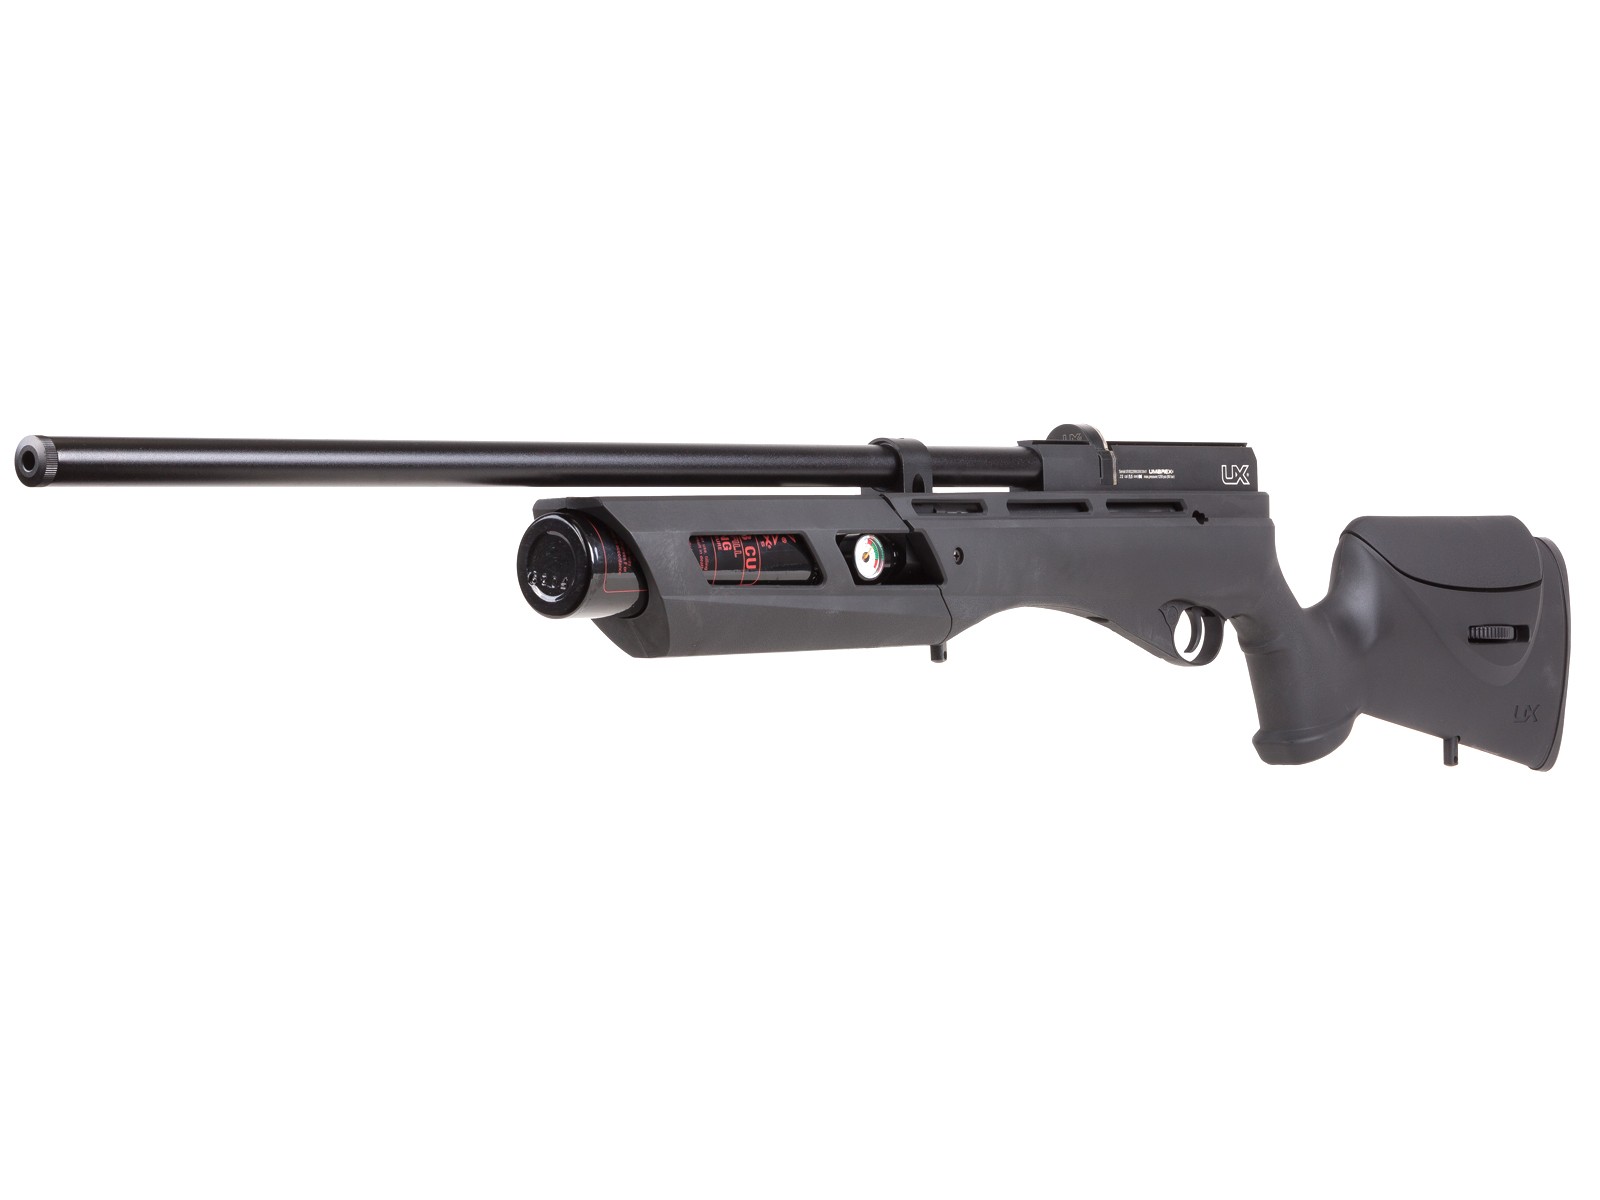 Umarex Gauntlet PCP Air Rifle, Synthetic Stock